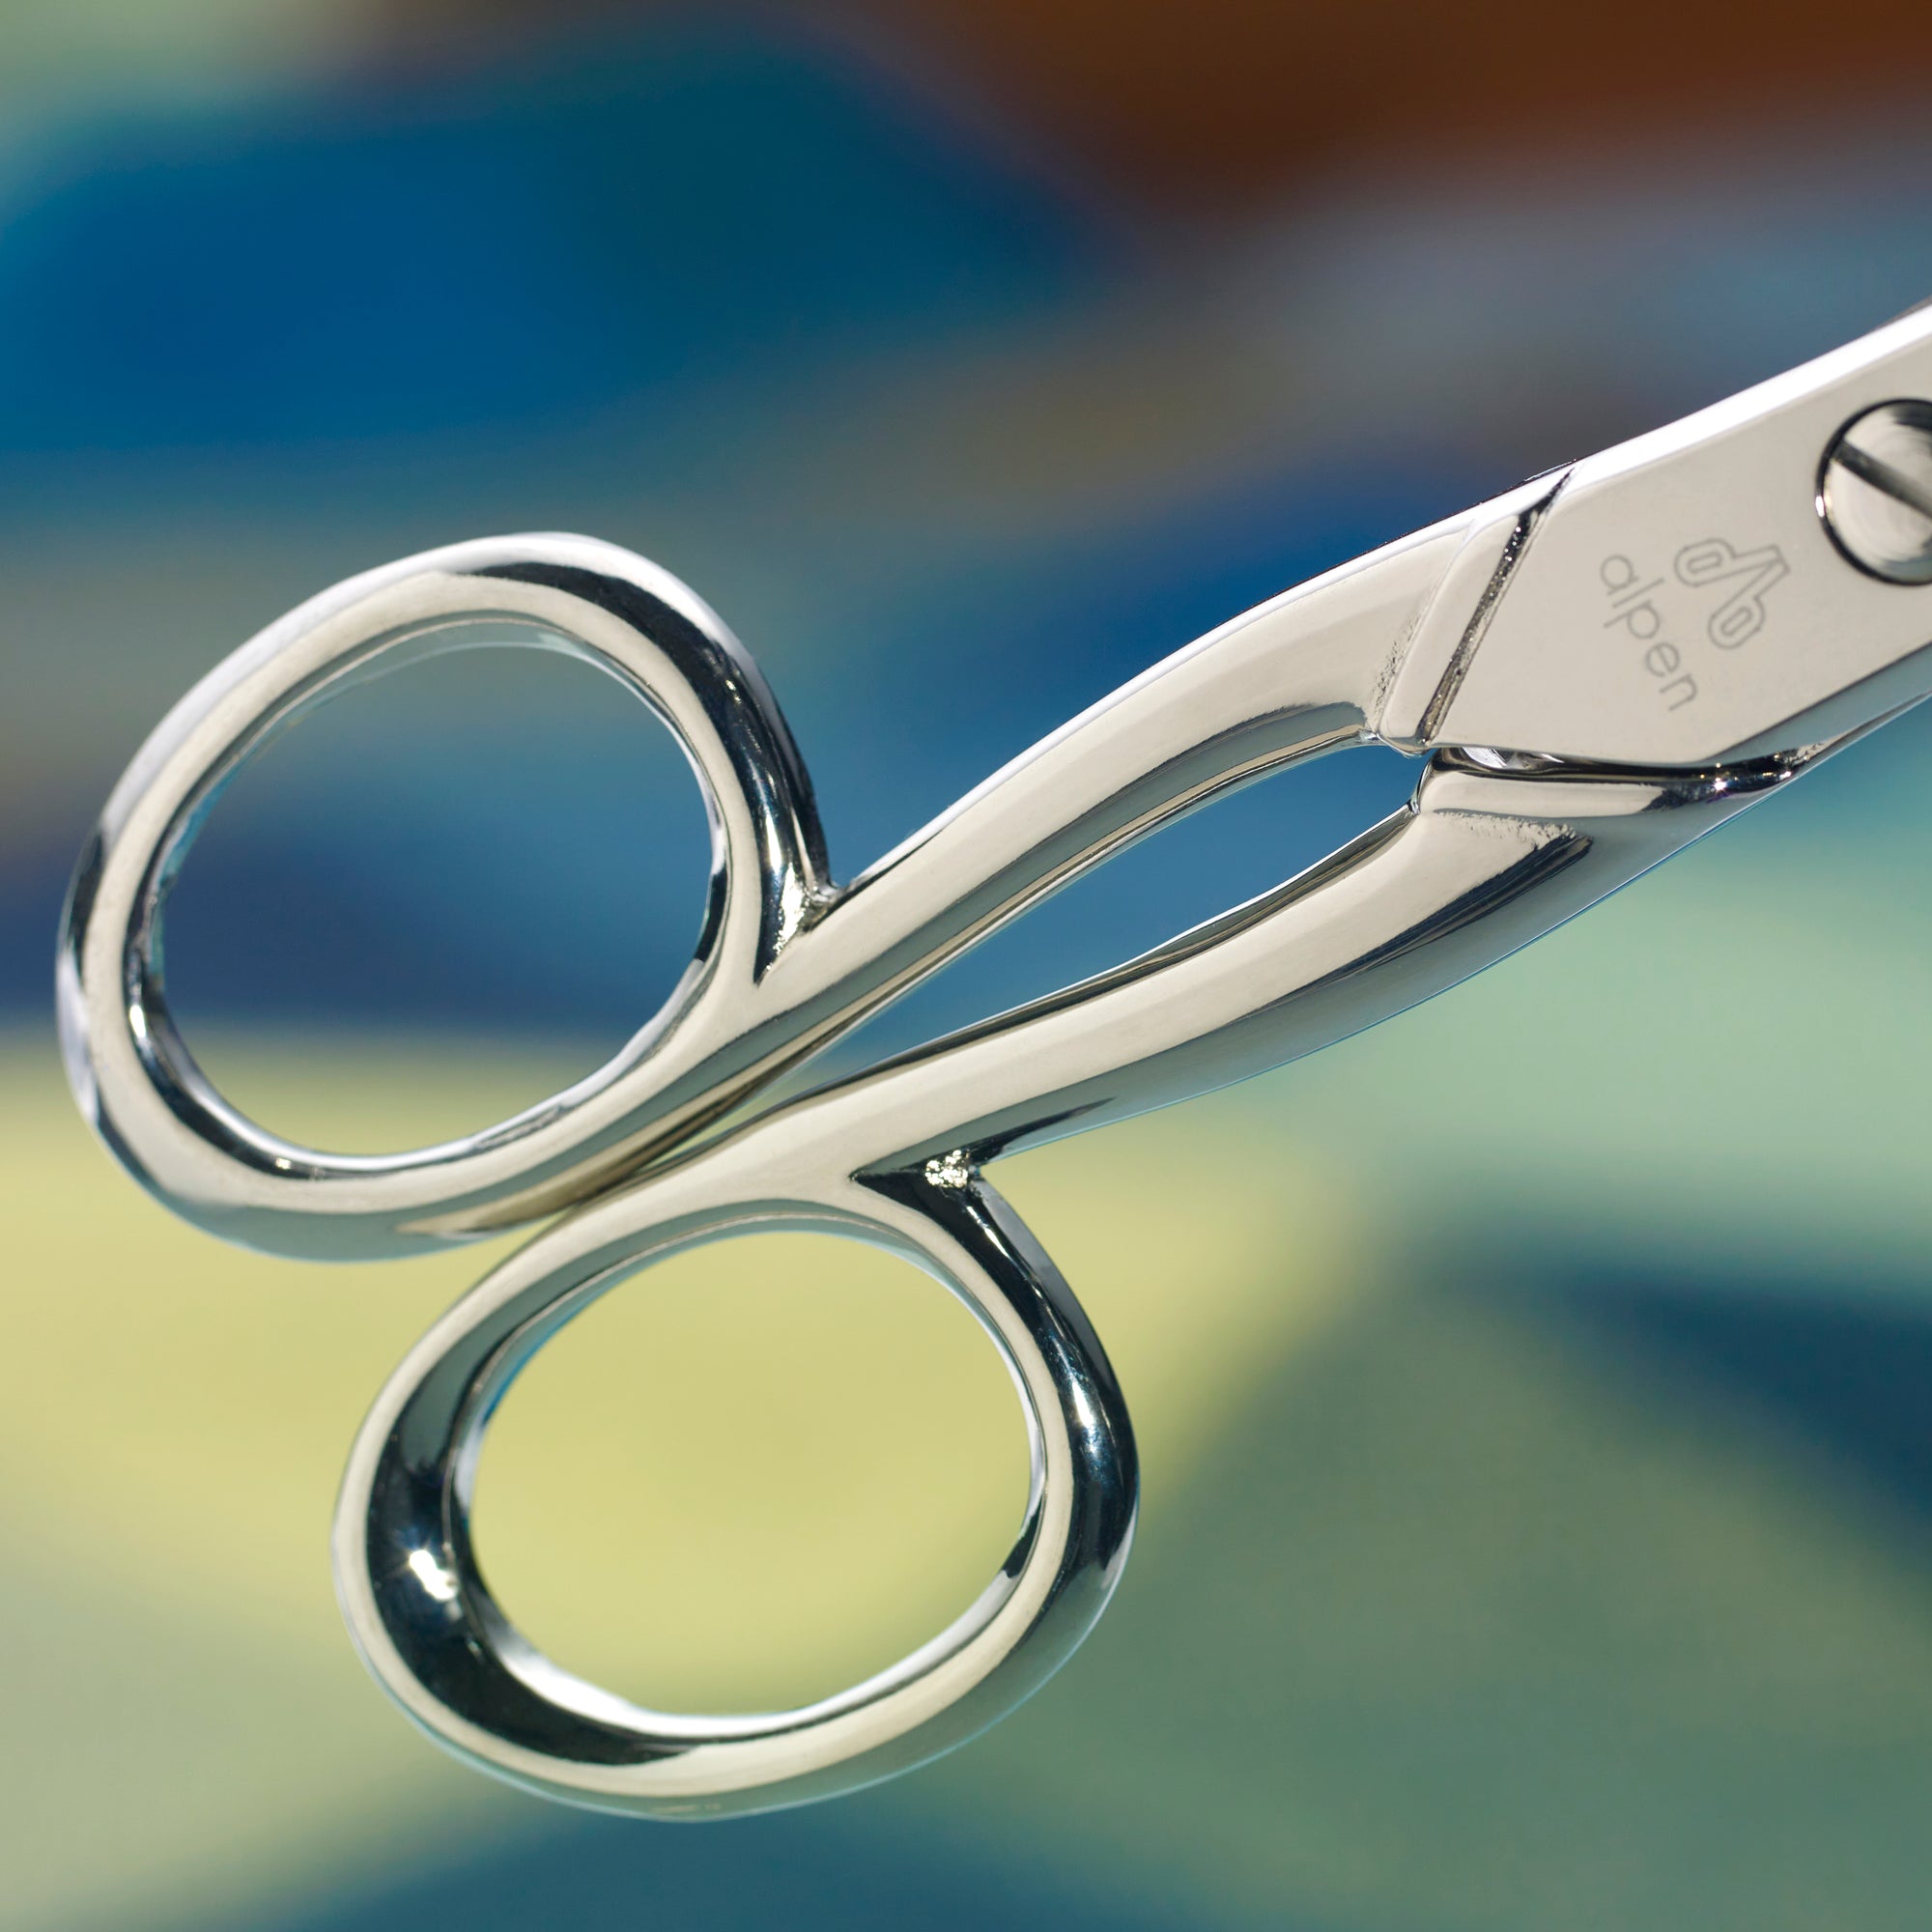 The Trouble with Left-Handed Scissors